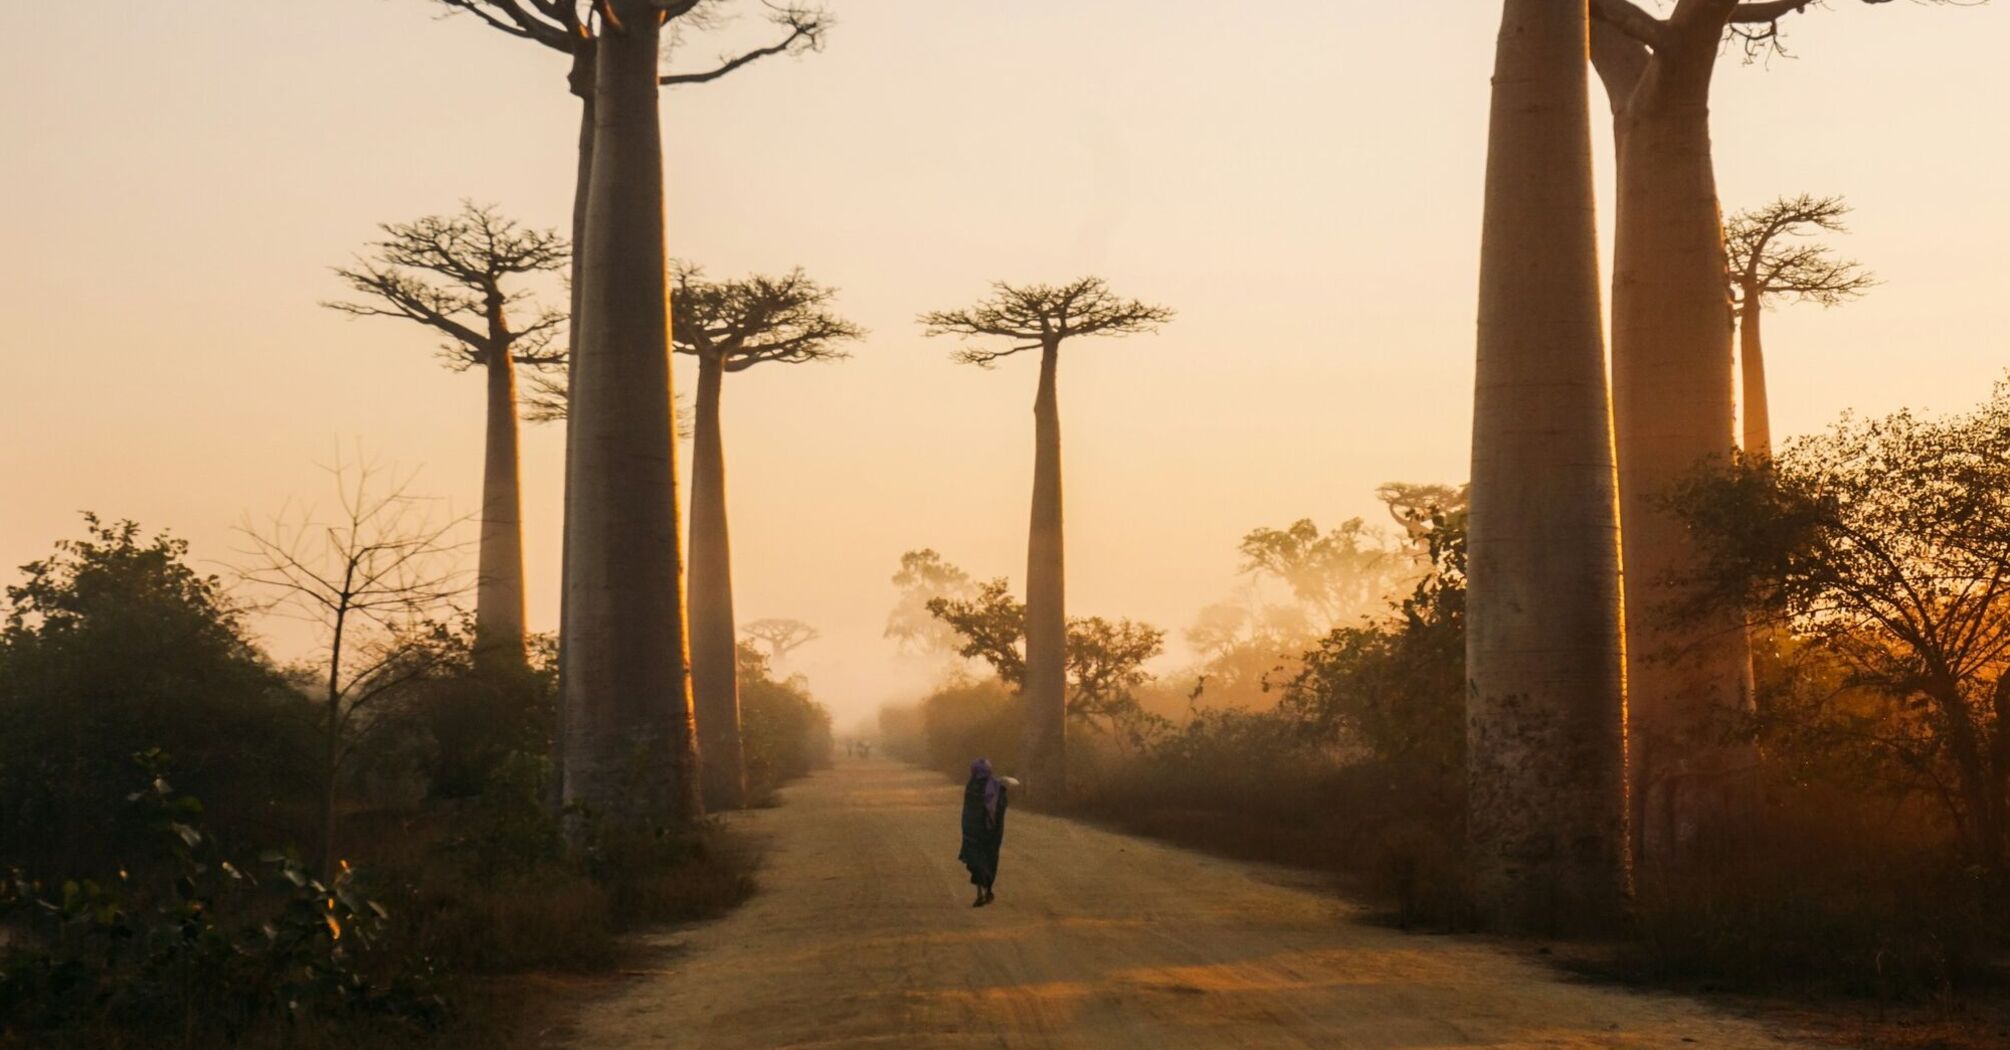 Beautiful alley of baobabs during sunrise in Morondava, Madagascar